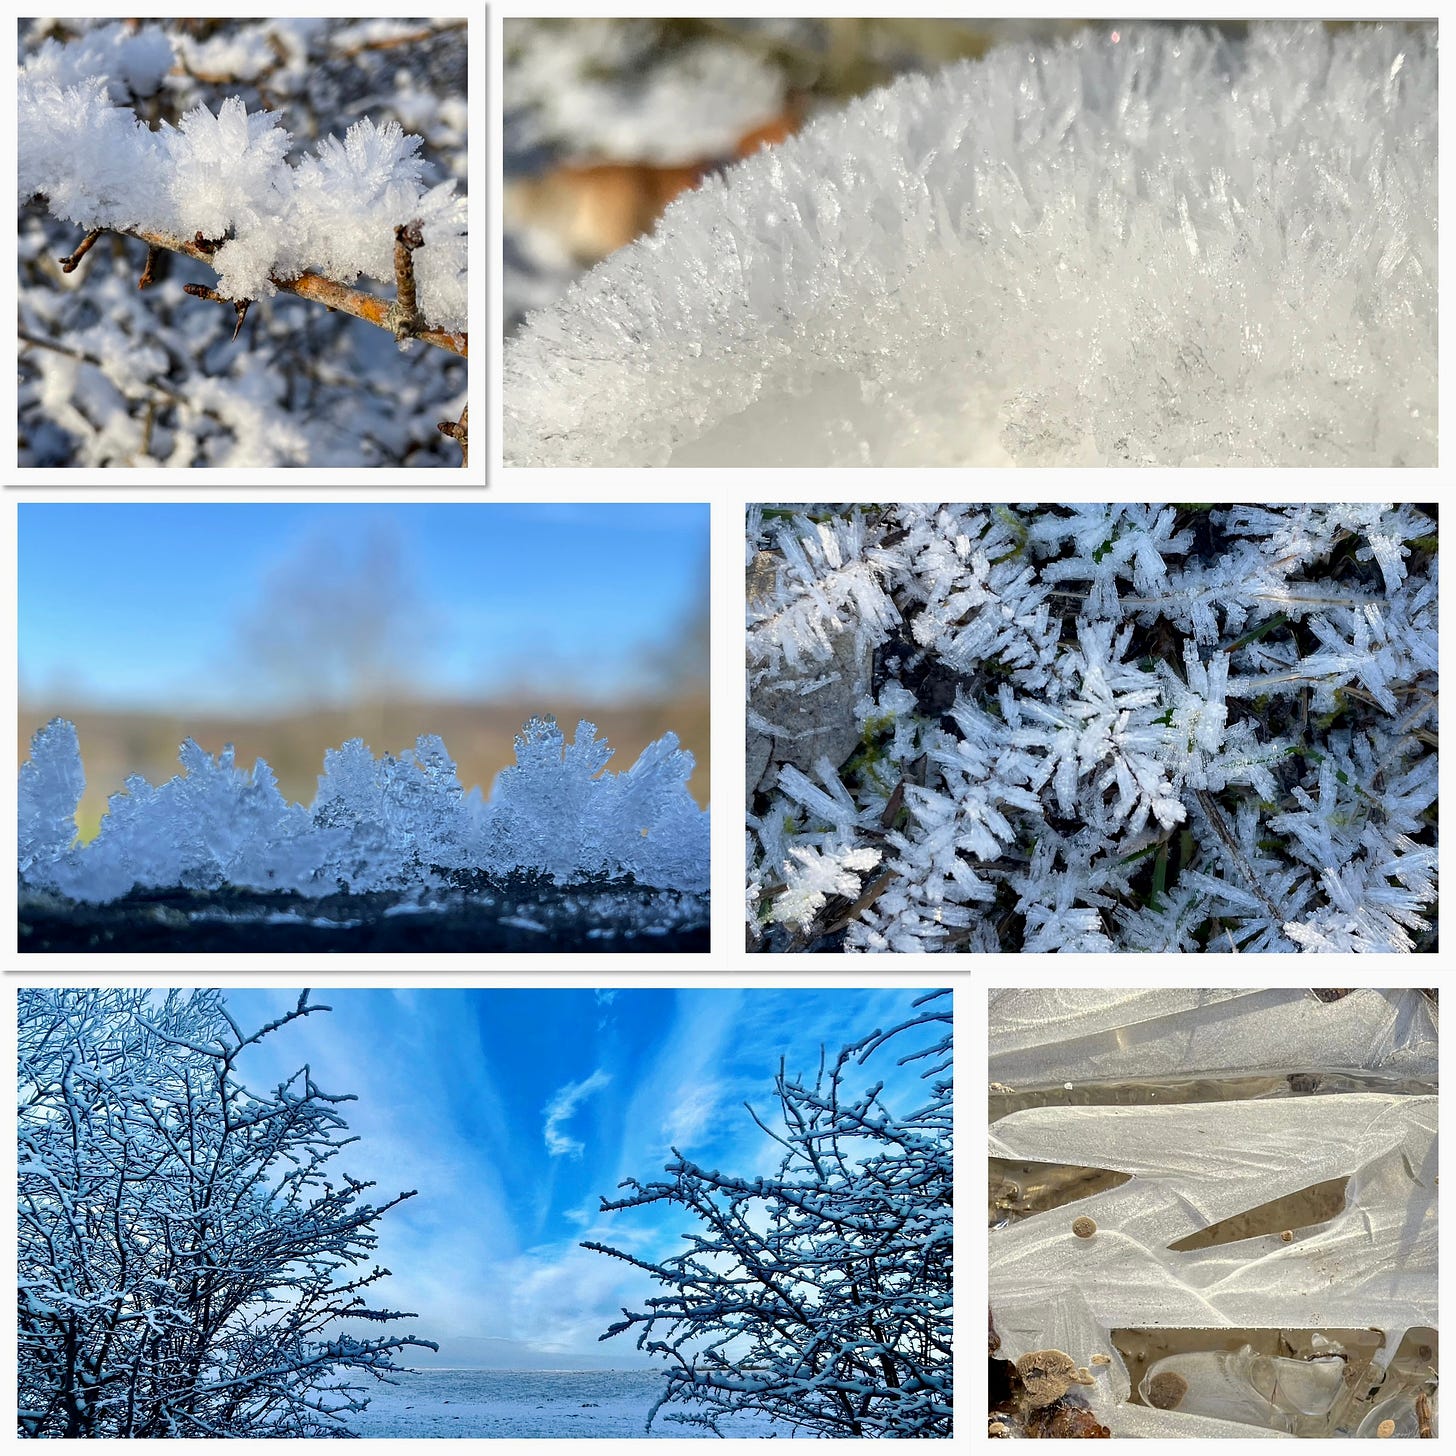 Images of frozen grasses, ice crystals on branches, fence posts, puddles and a dramatic winter sky